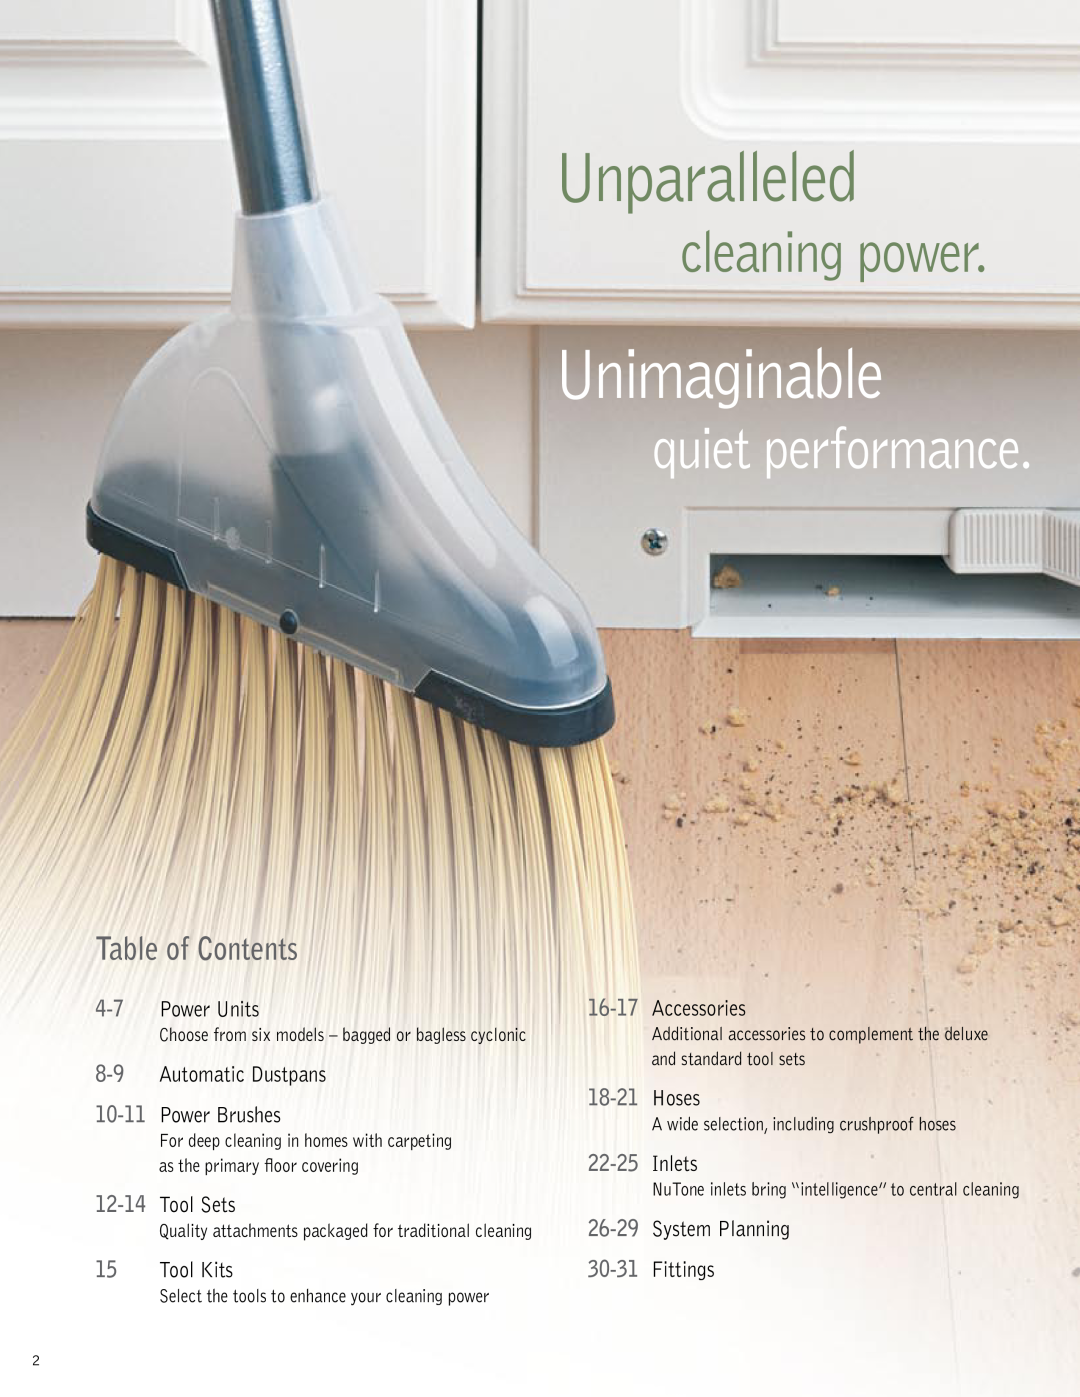 NuTone CH620 Unparalleled, Unimaginable, quiet performance, cleaning power, Table of Contents, Power Units, Tool Sets 